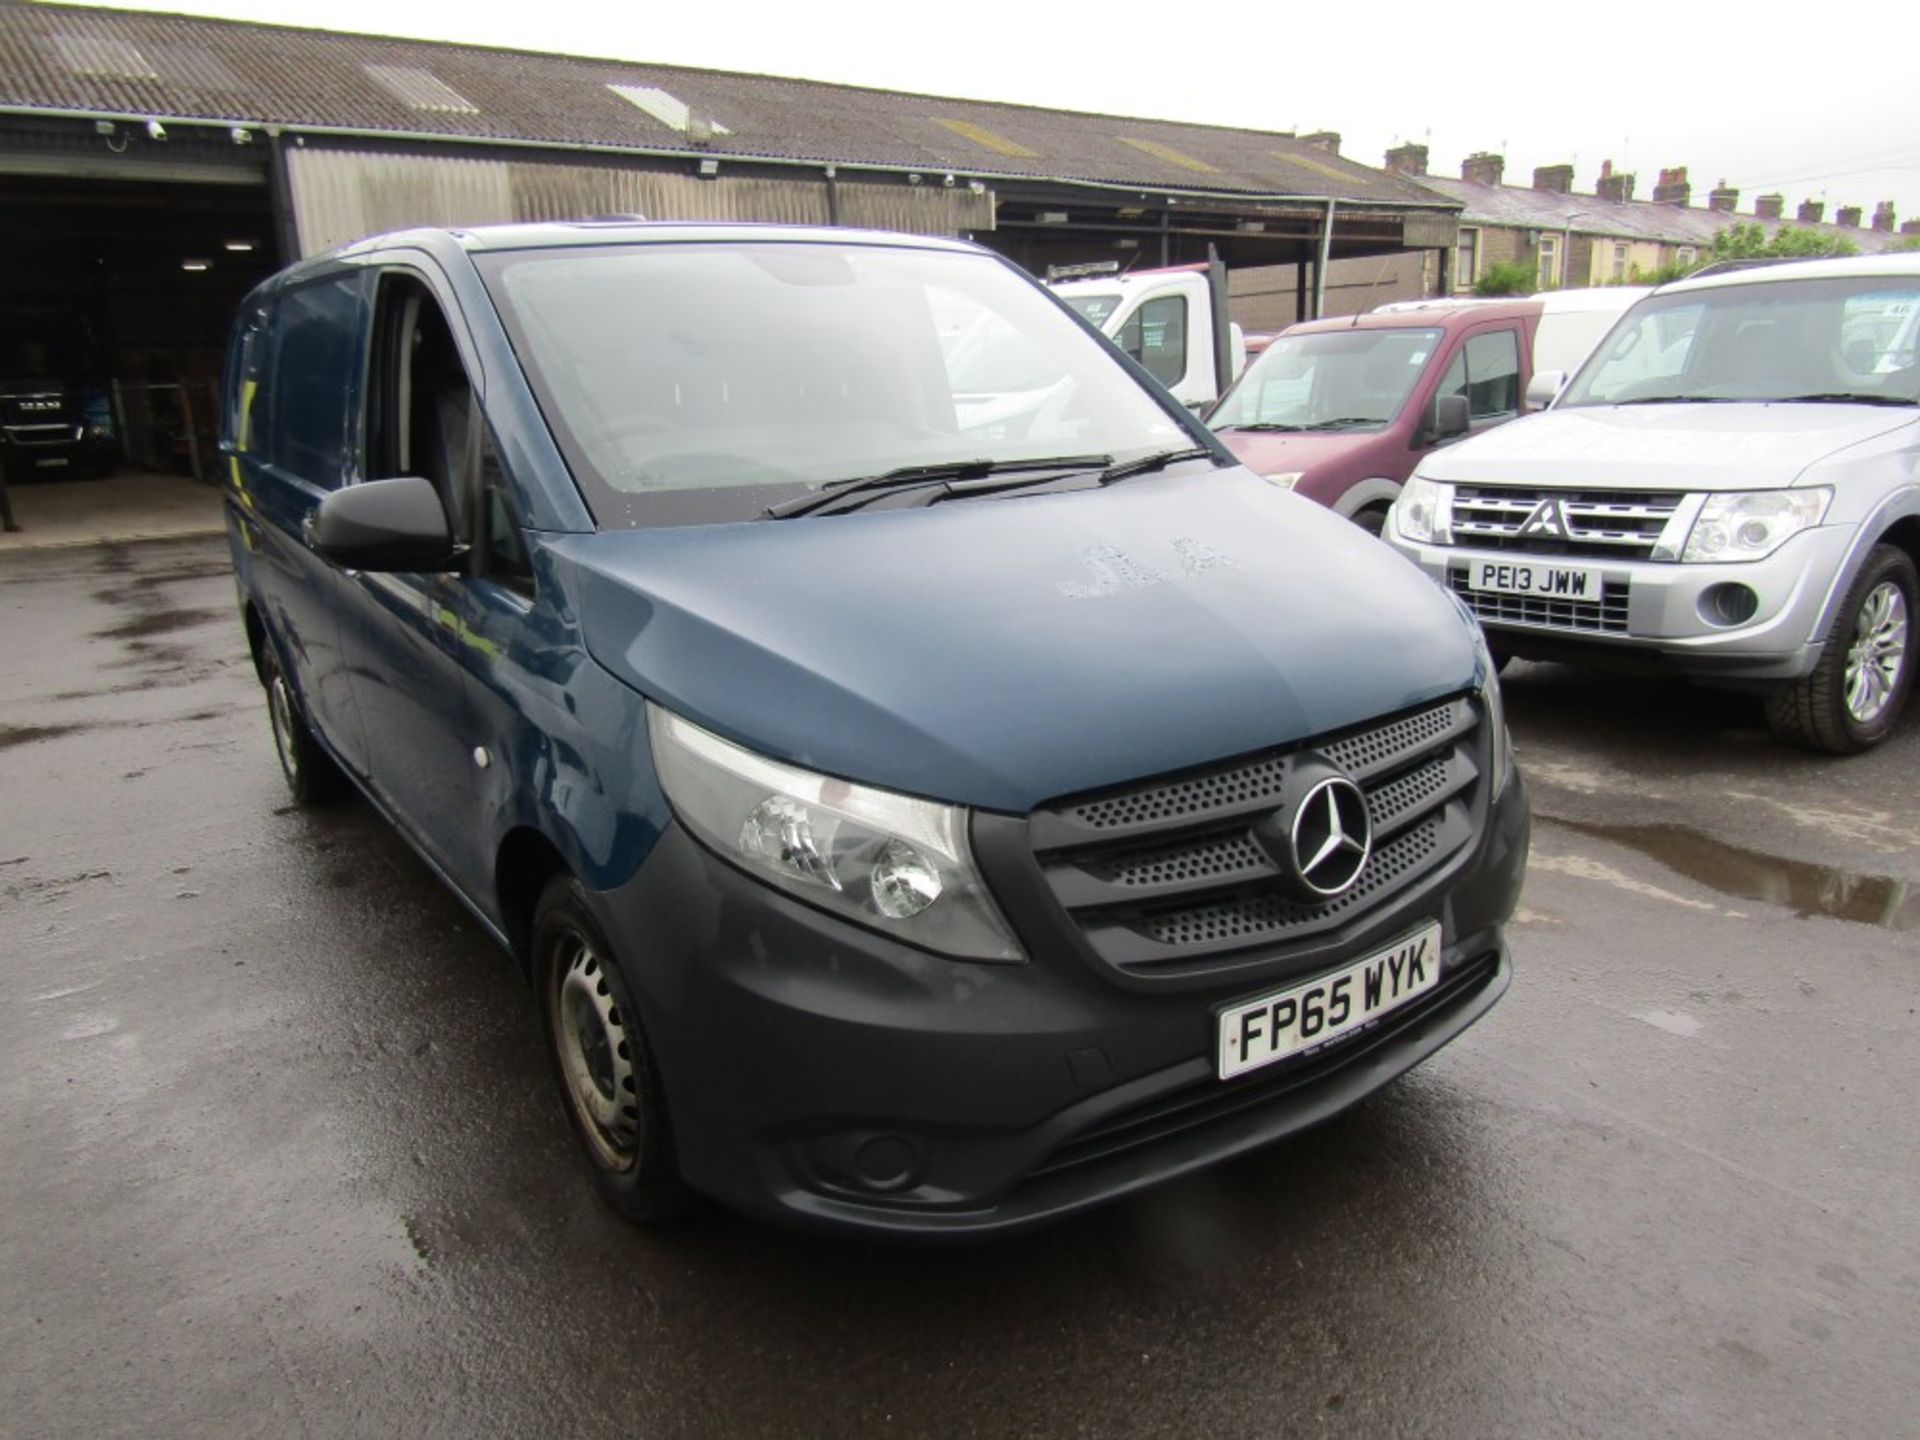 65 reg MERCEDES VITO 109 CDI, 1ST REG 12/15, TEST 12/22, 257794M, V5 HERE, 2 FORMER KEEPERS [NO